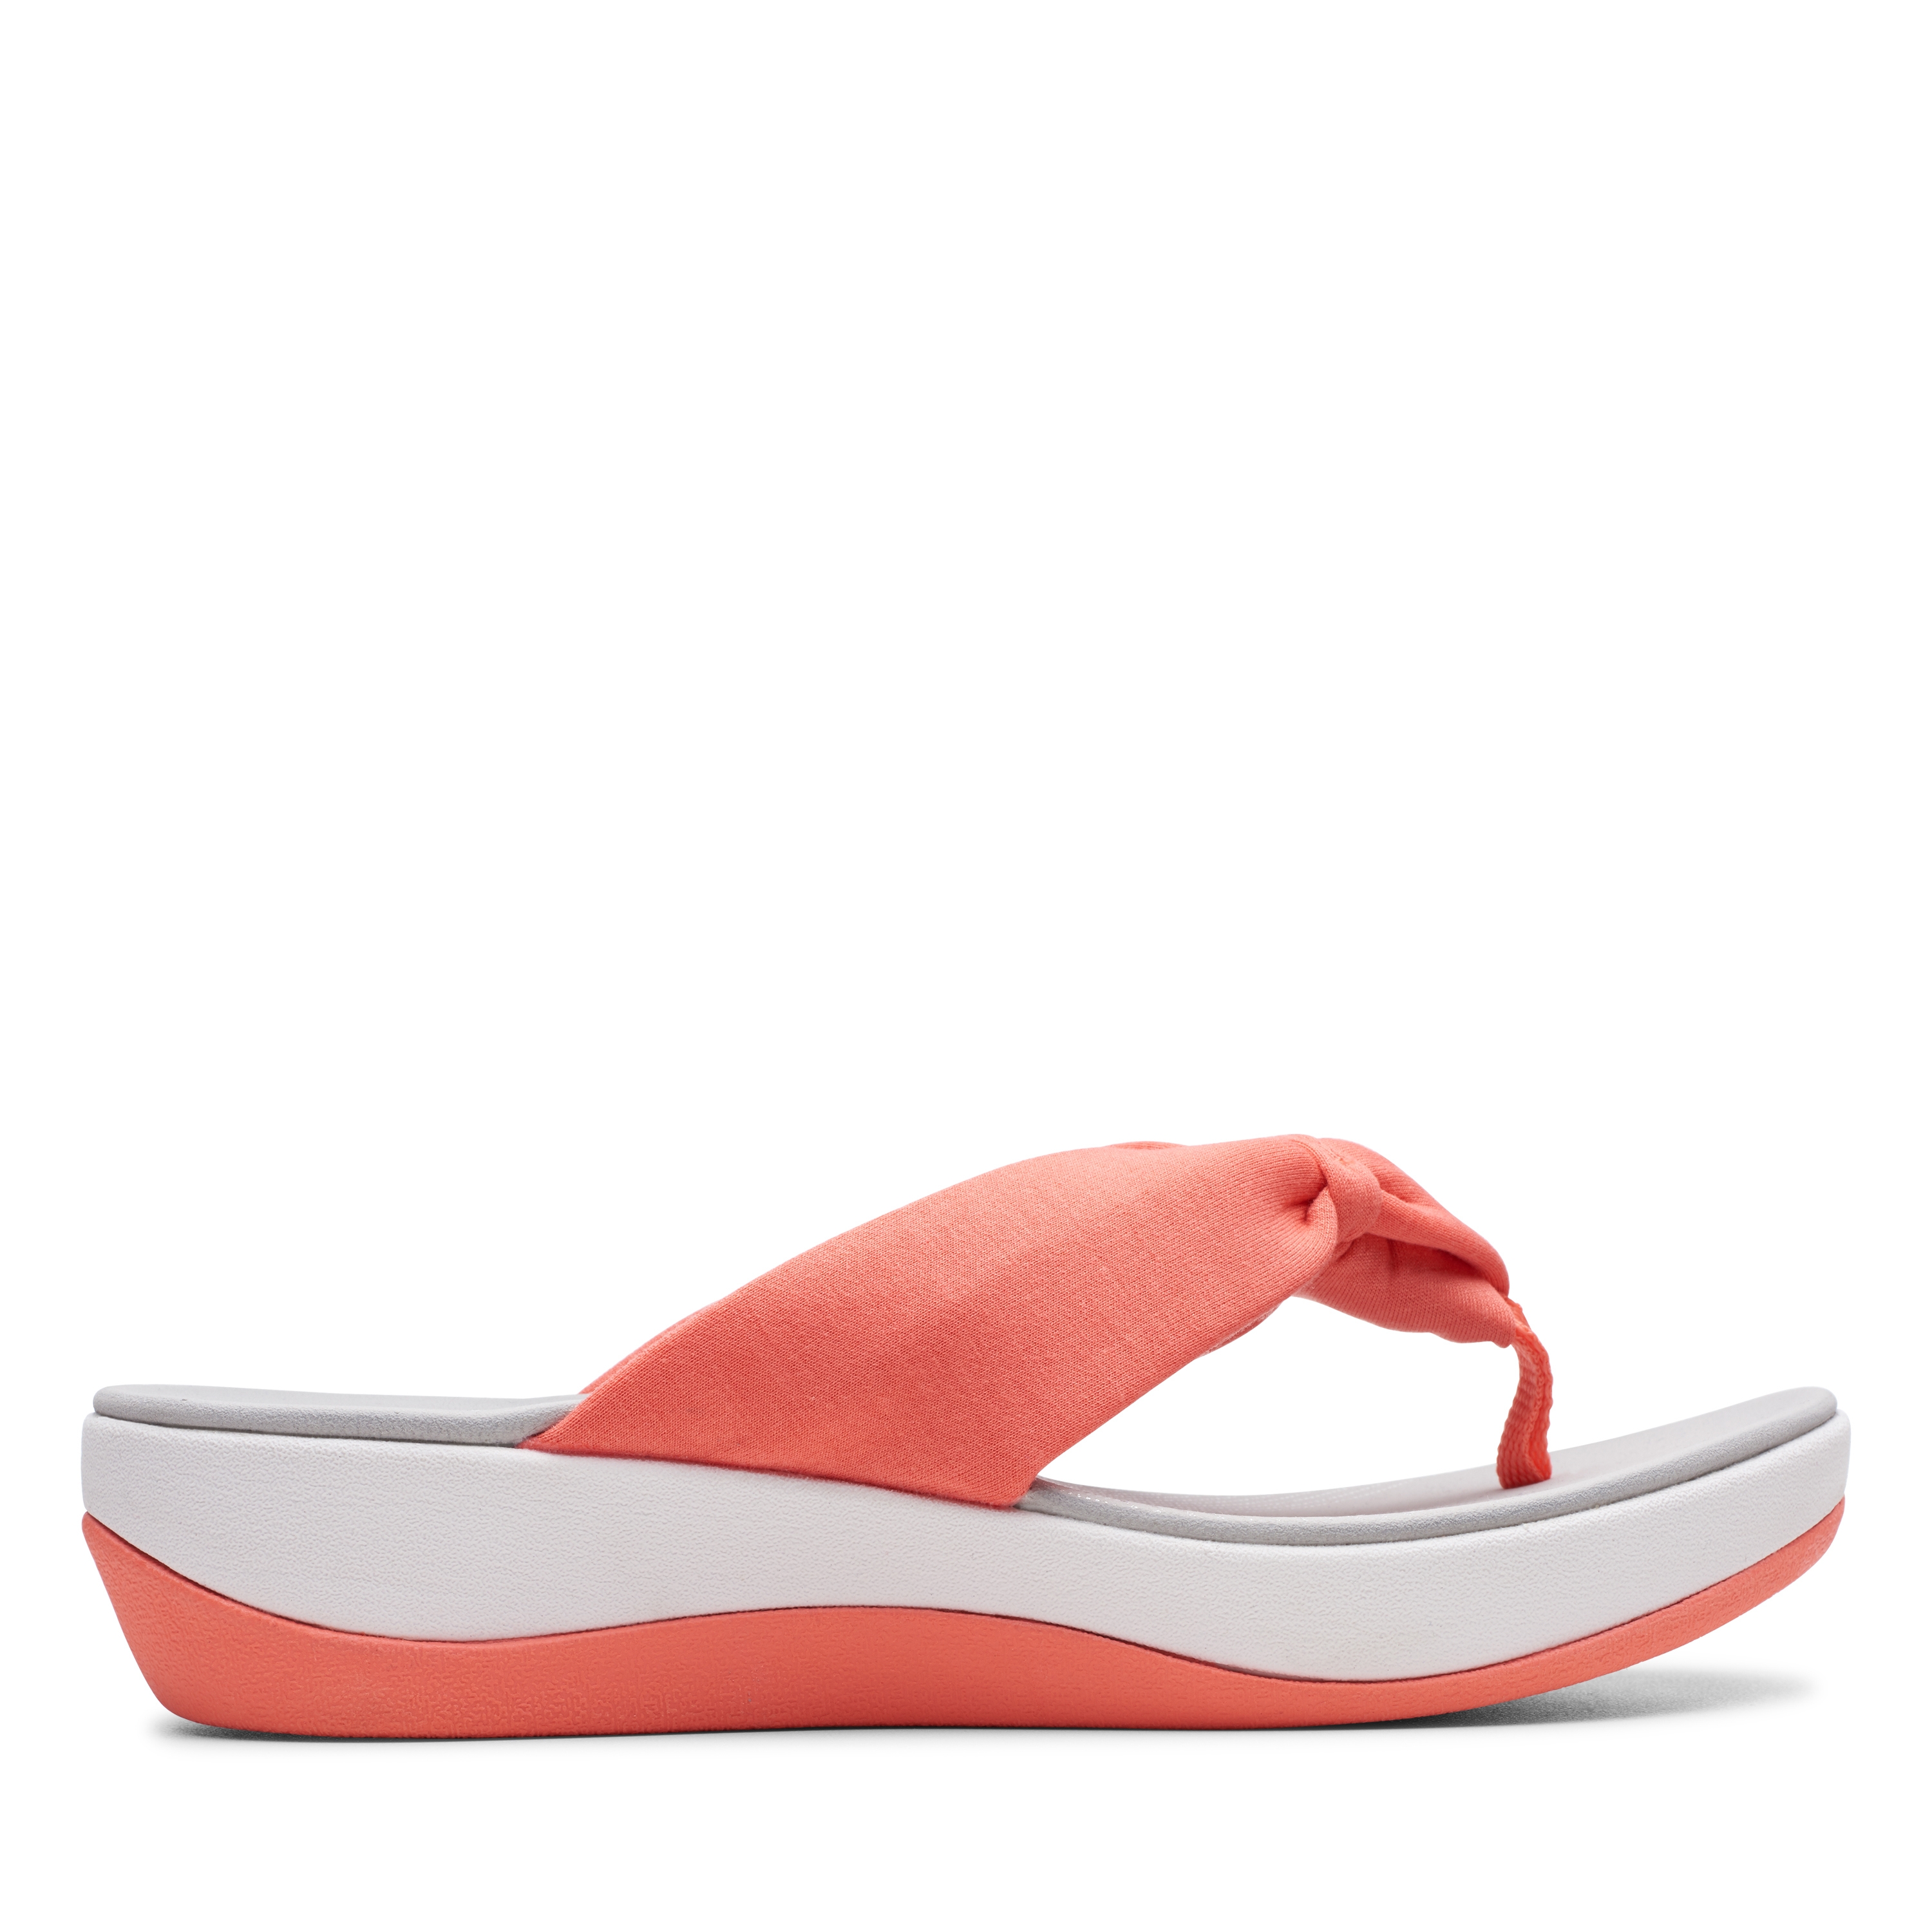 Clarks | Women's Red Synthetic Sandals 0